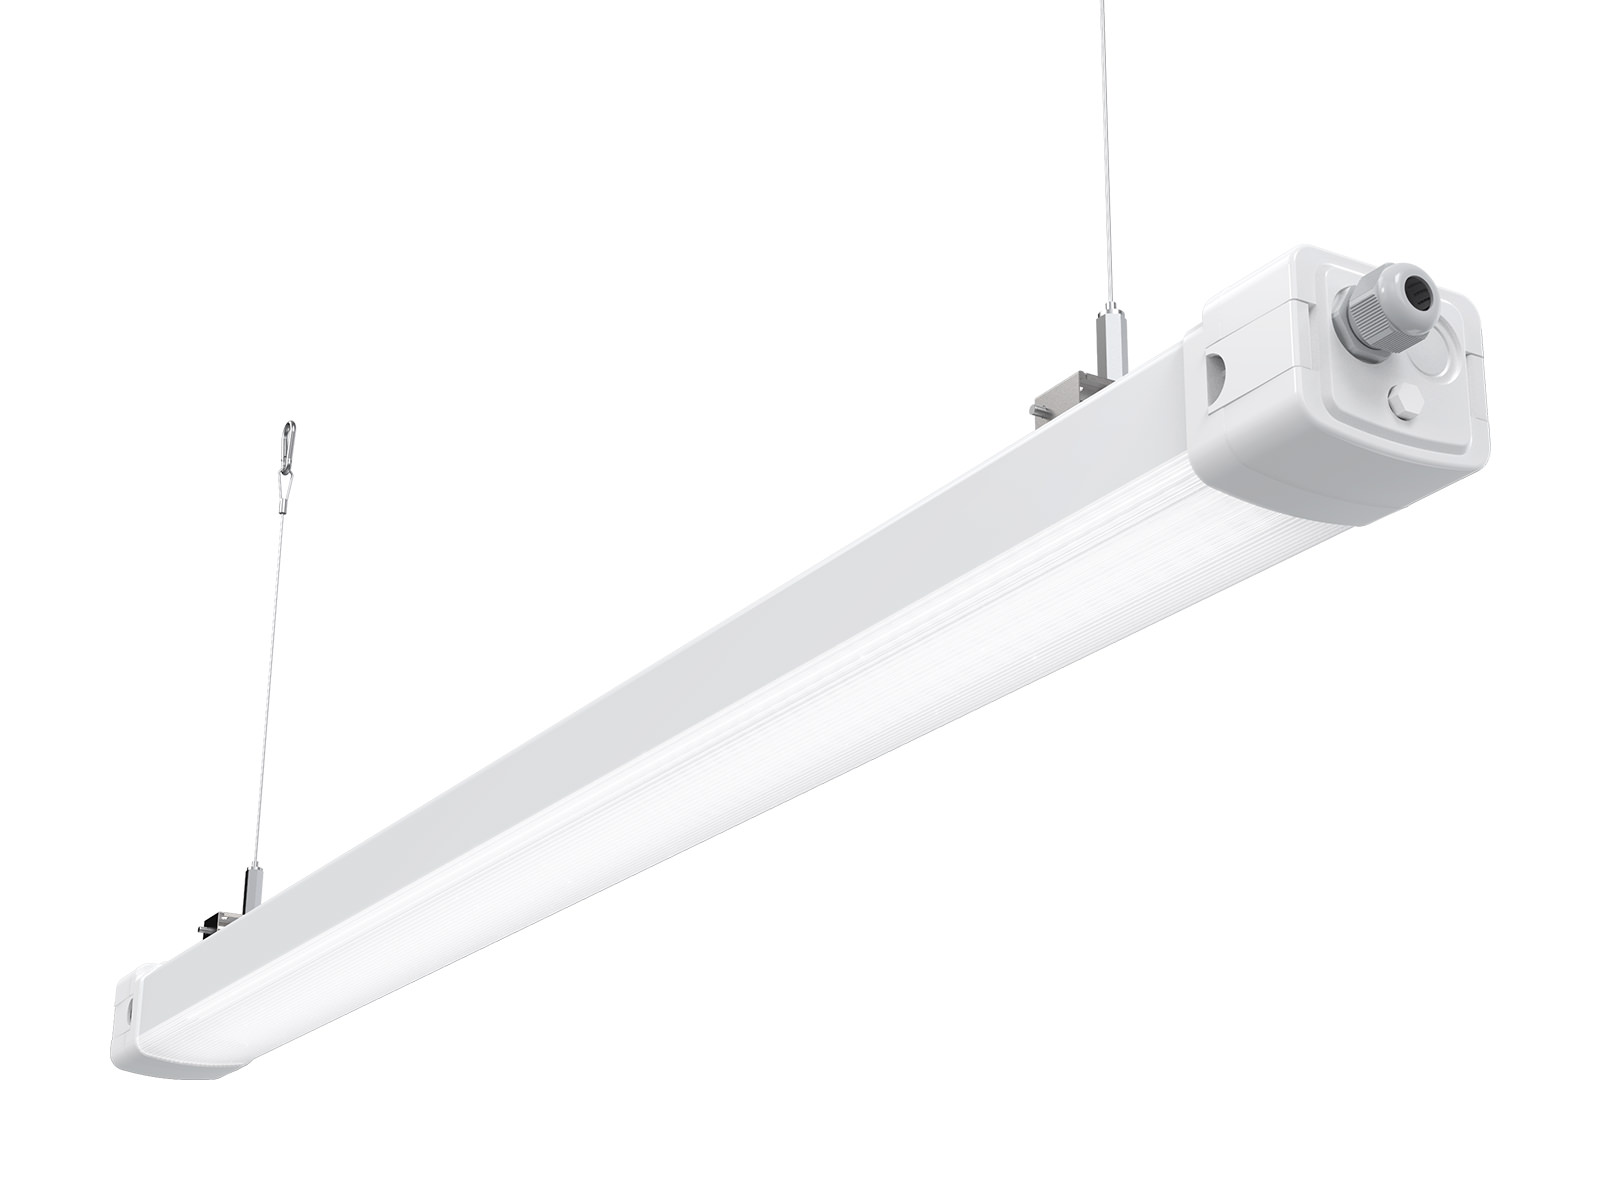 LHB28 Upgraded LED Tri-proof Light with Multi-functions